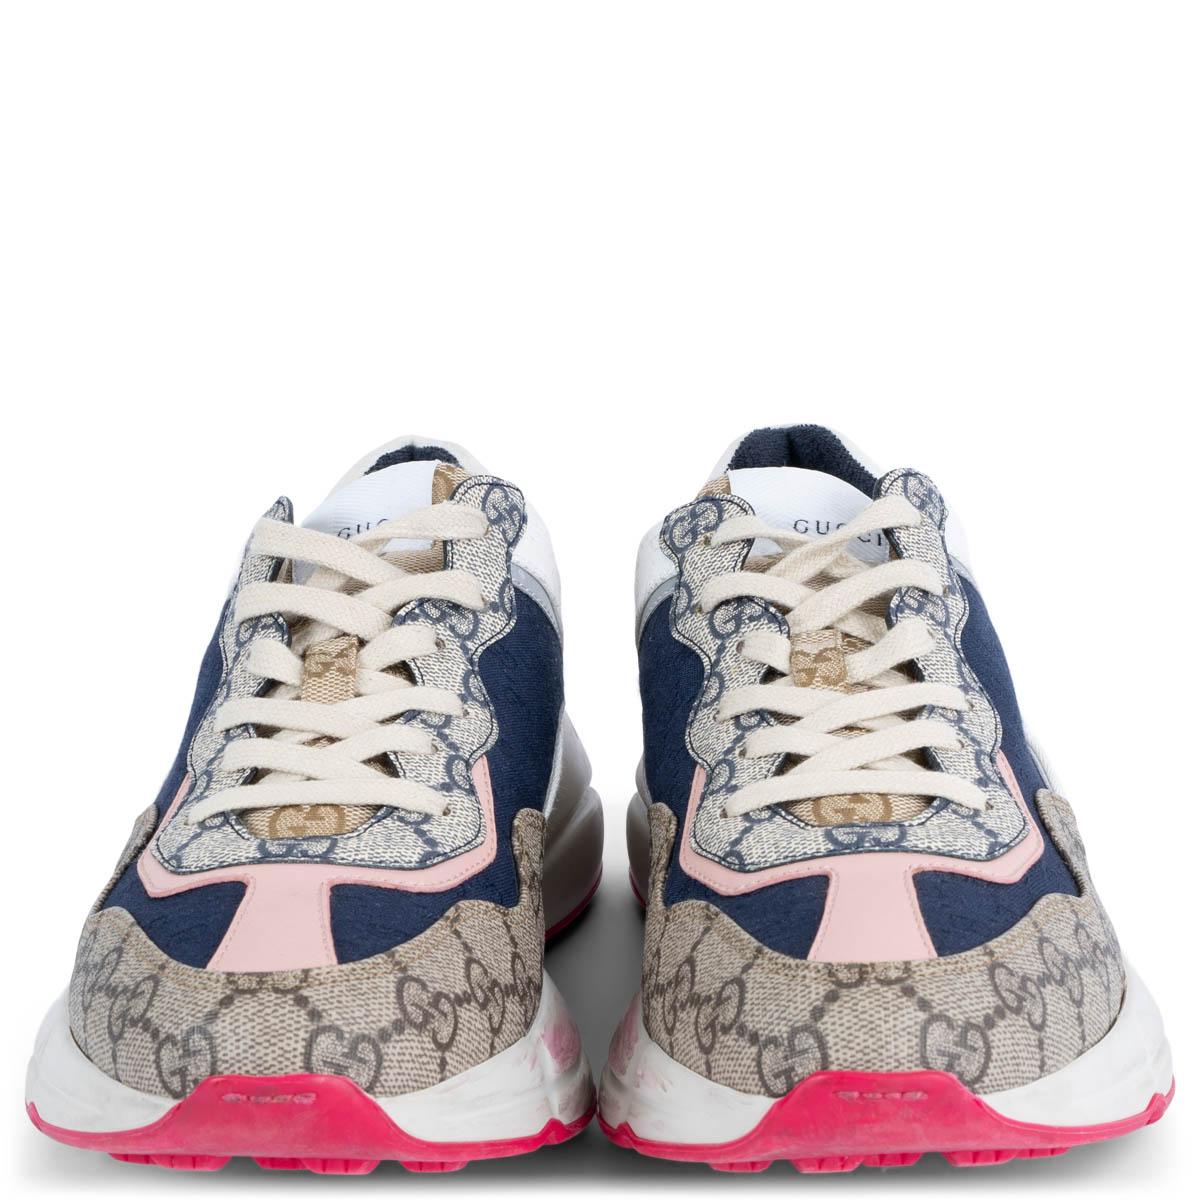 100% authentic Gucci 2020 Rhyton sneakers in beige, rose pink, white and navy blue GG Supreme canvas set on a chunky white and pink rubber sole. Have been worn and show marks on the inner side of the white sole. Overall in very good condition.